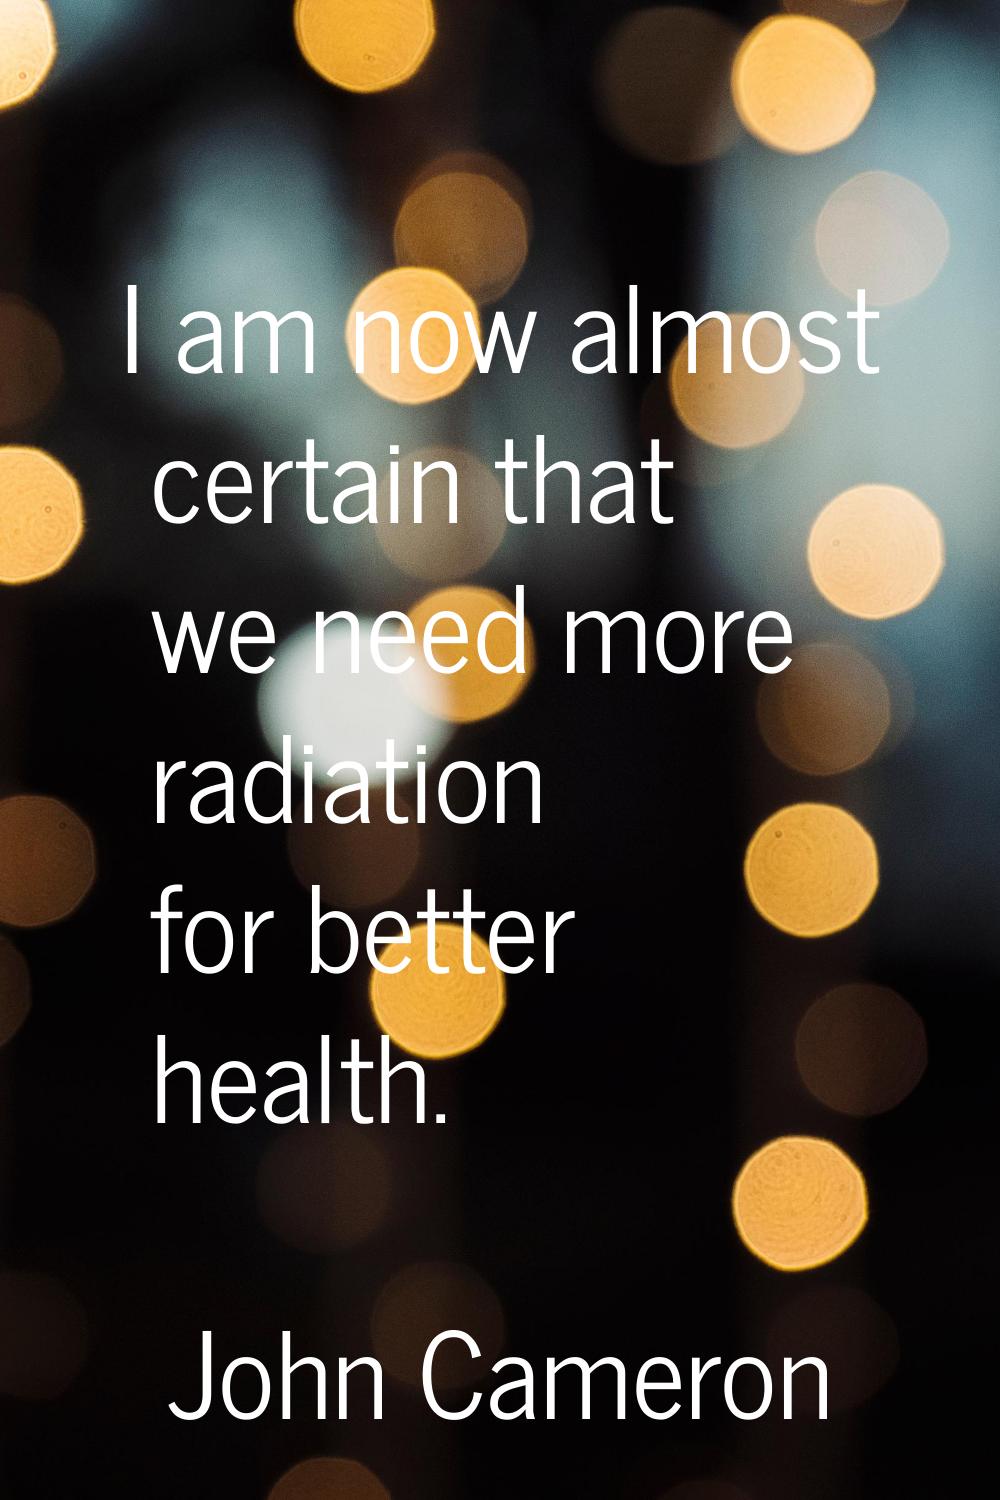 I am now almost certain that we need more radiation for better health.